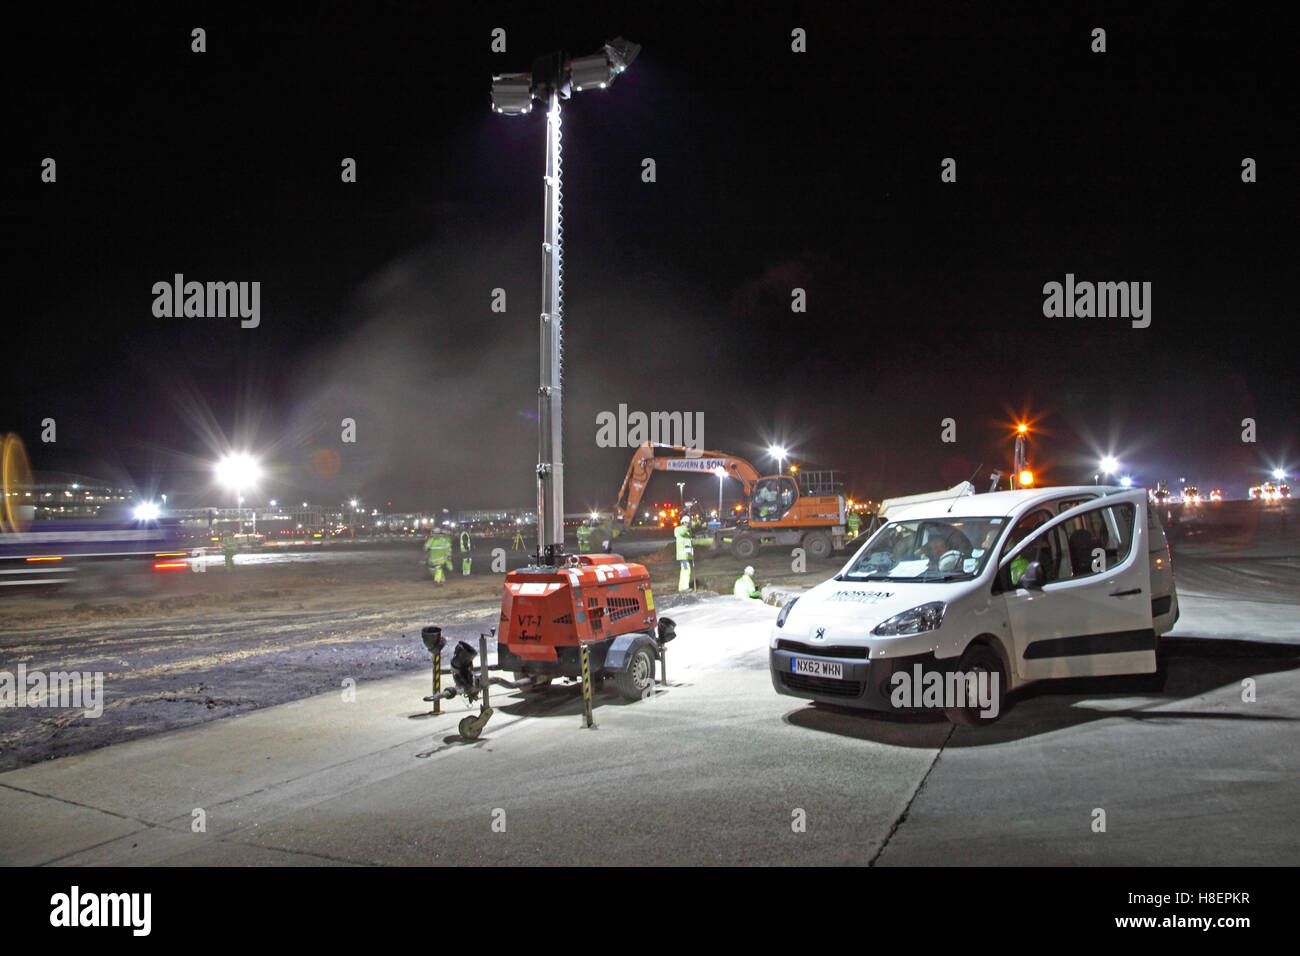 A self-contained, mobile lighting tower provides illumination for overnight runway resurfacing at London's Heathrow Airport Stock Photo